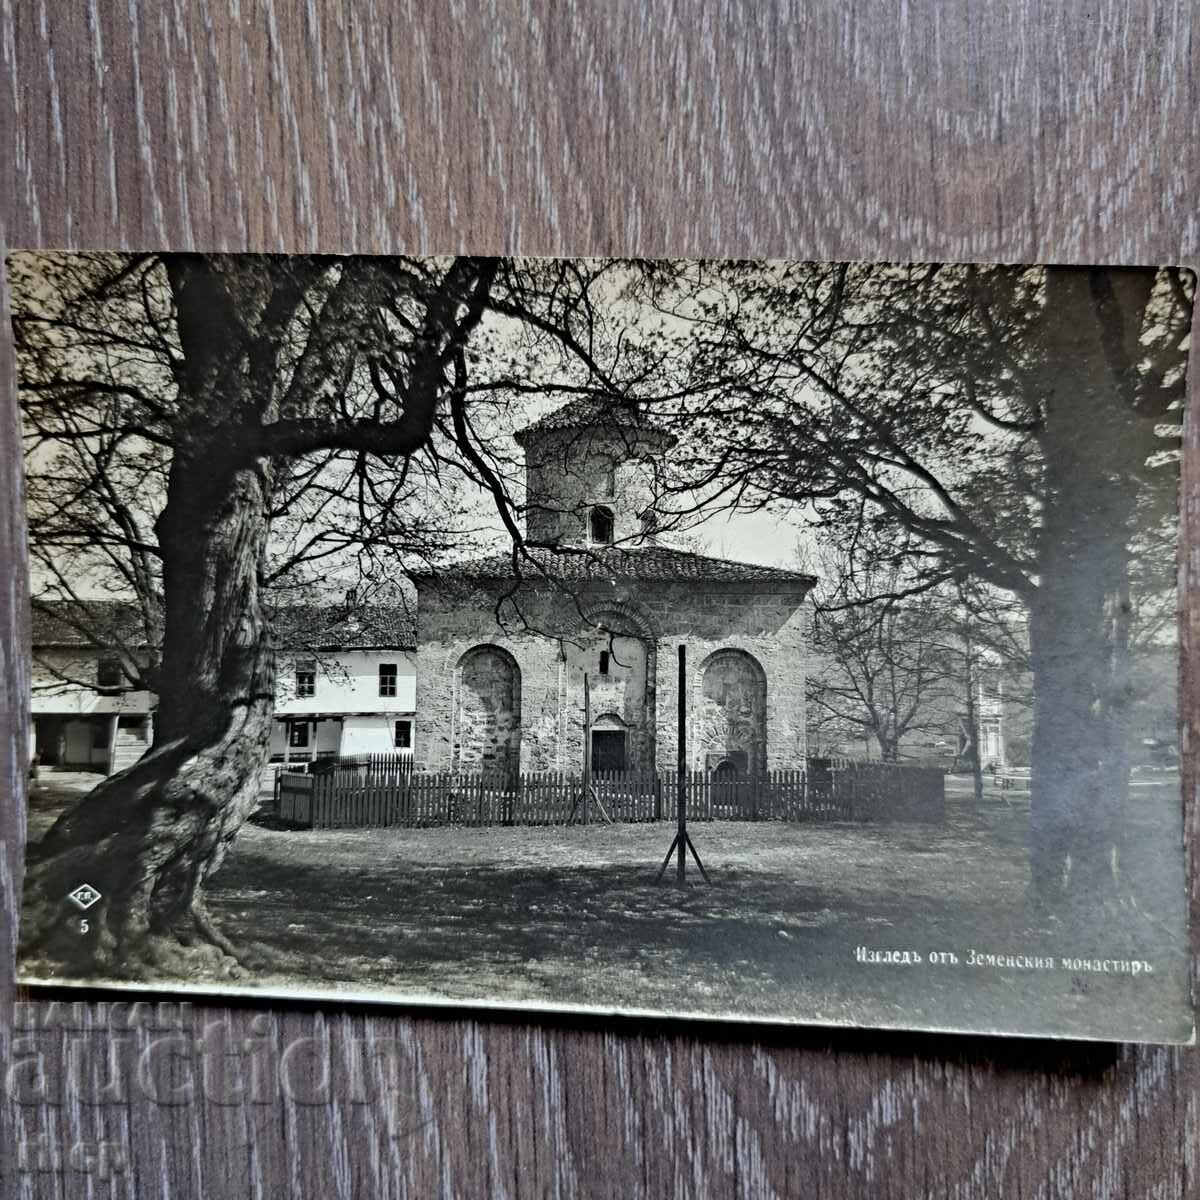 Zemensky monastery 1934 old picture card